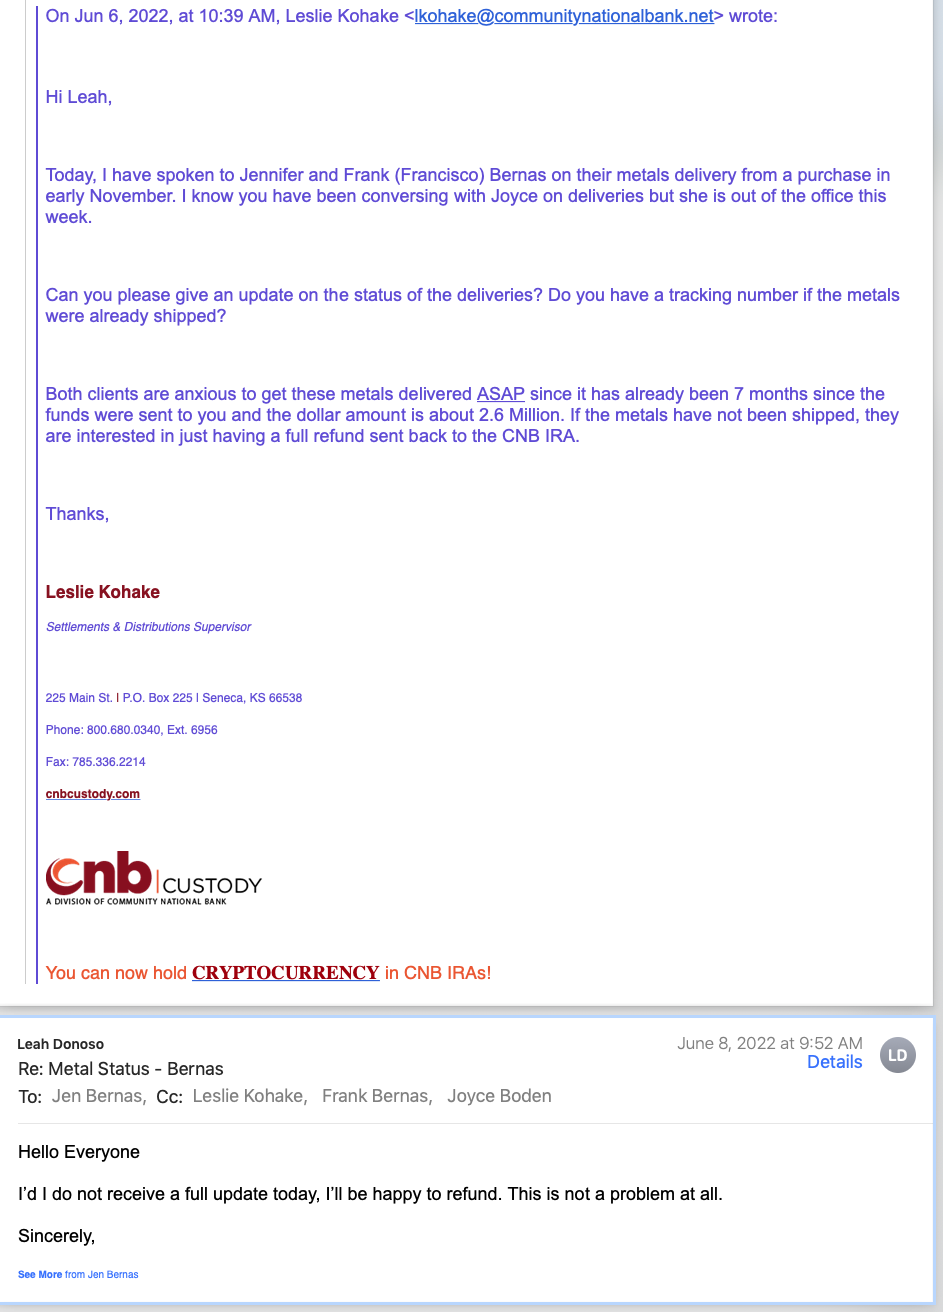 Communication between CNB and Regal Assets: REFUND